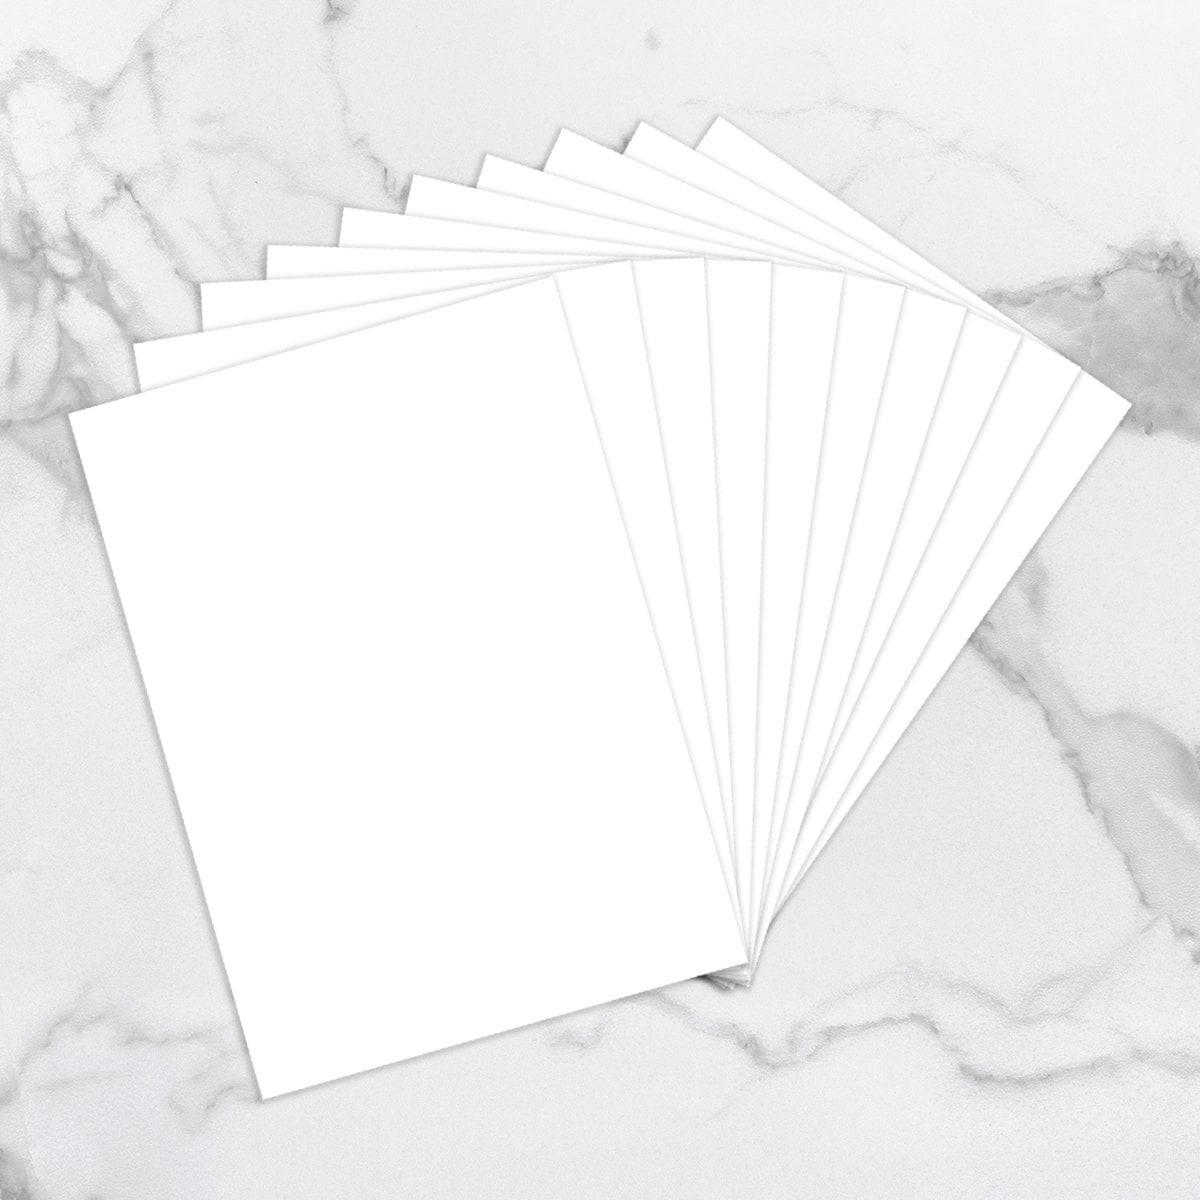 PaperPhant PaperPant White Premium (220g) Sketchbook Set of 3 (White)